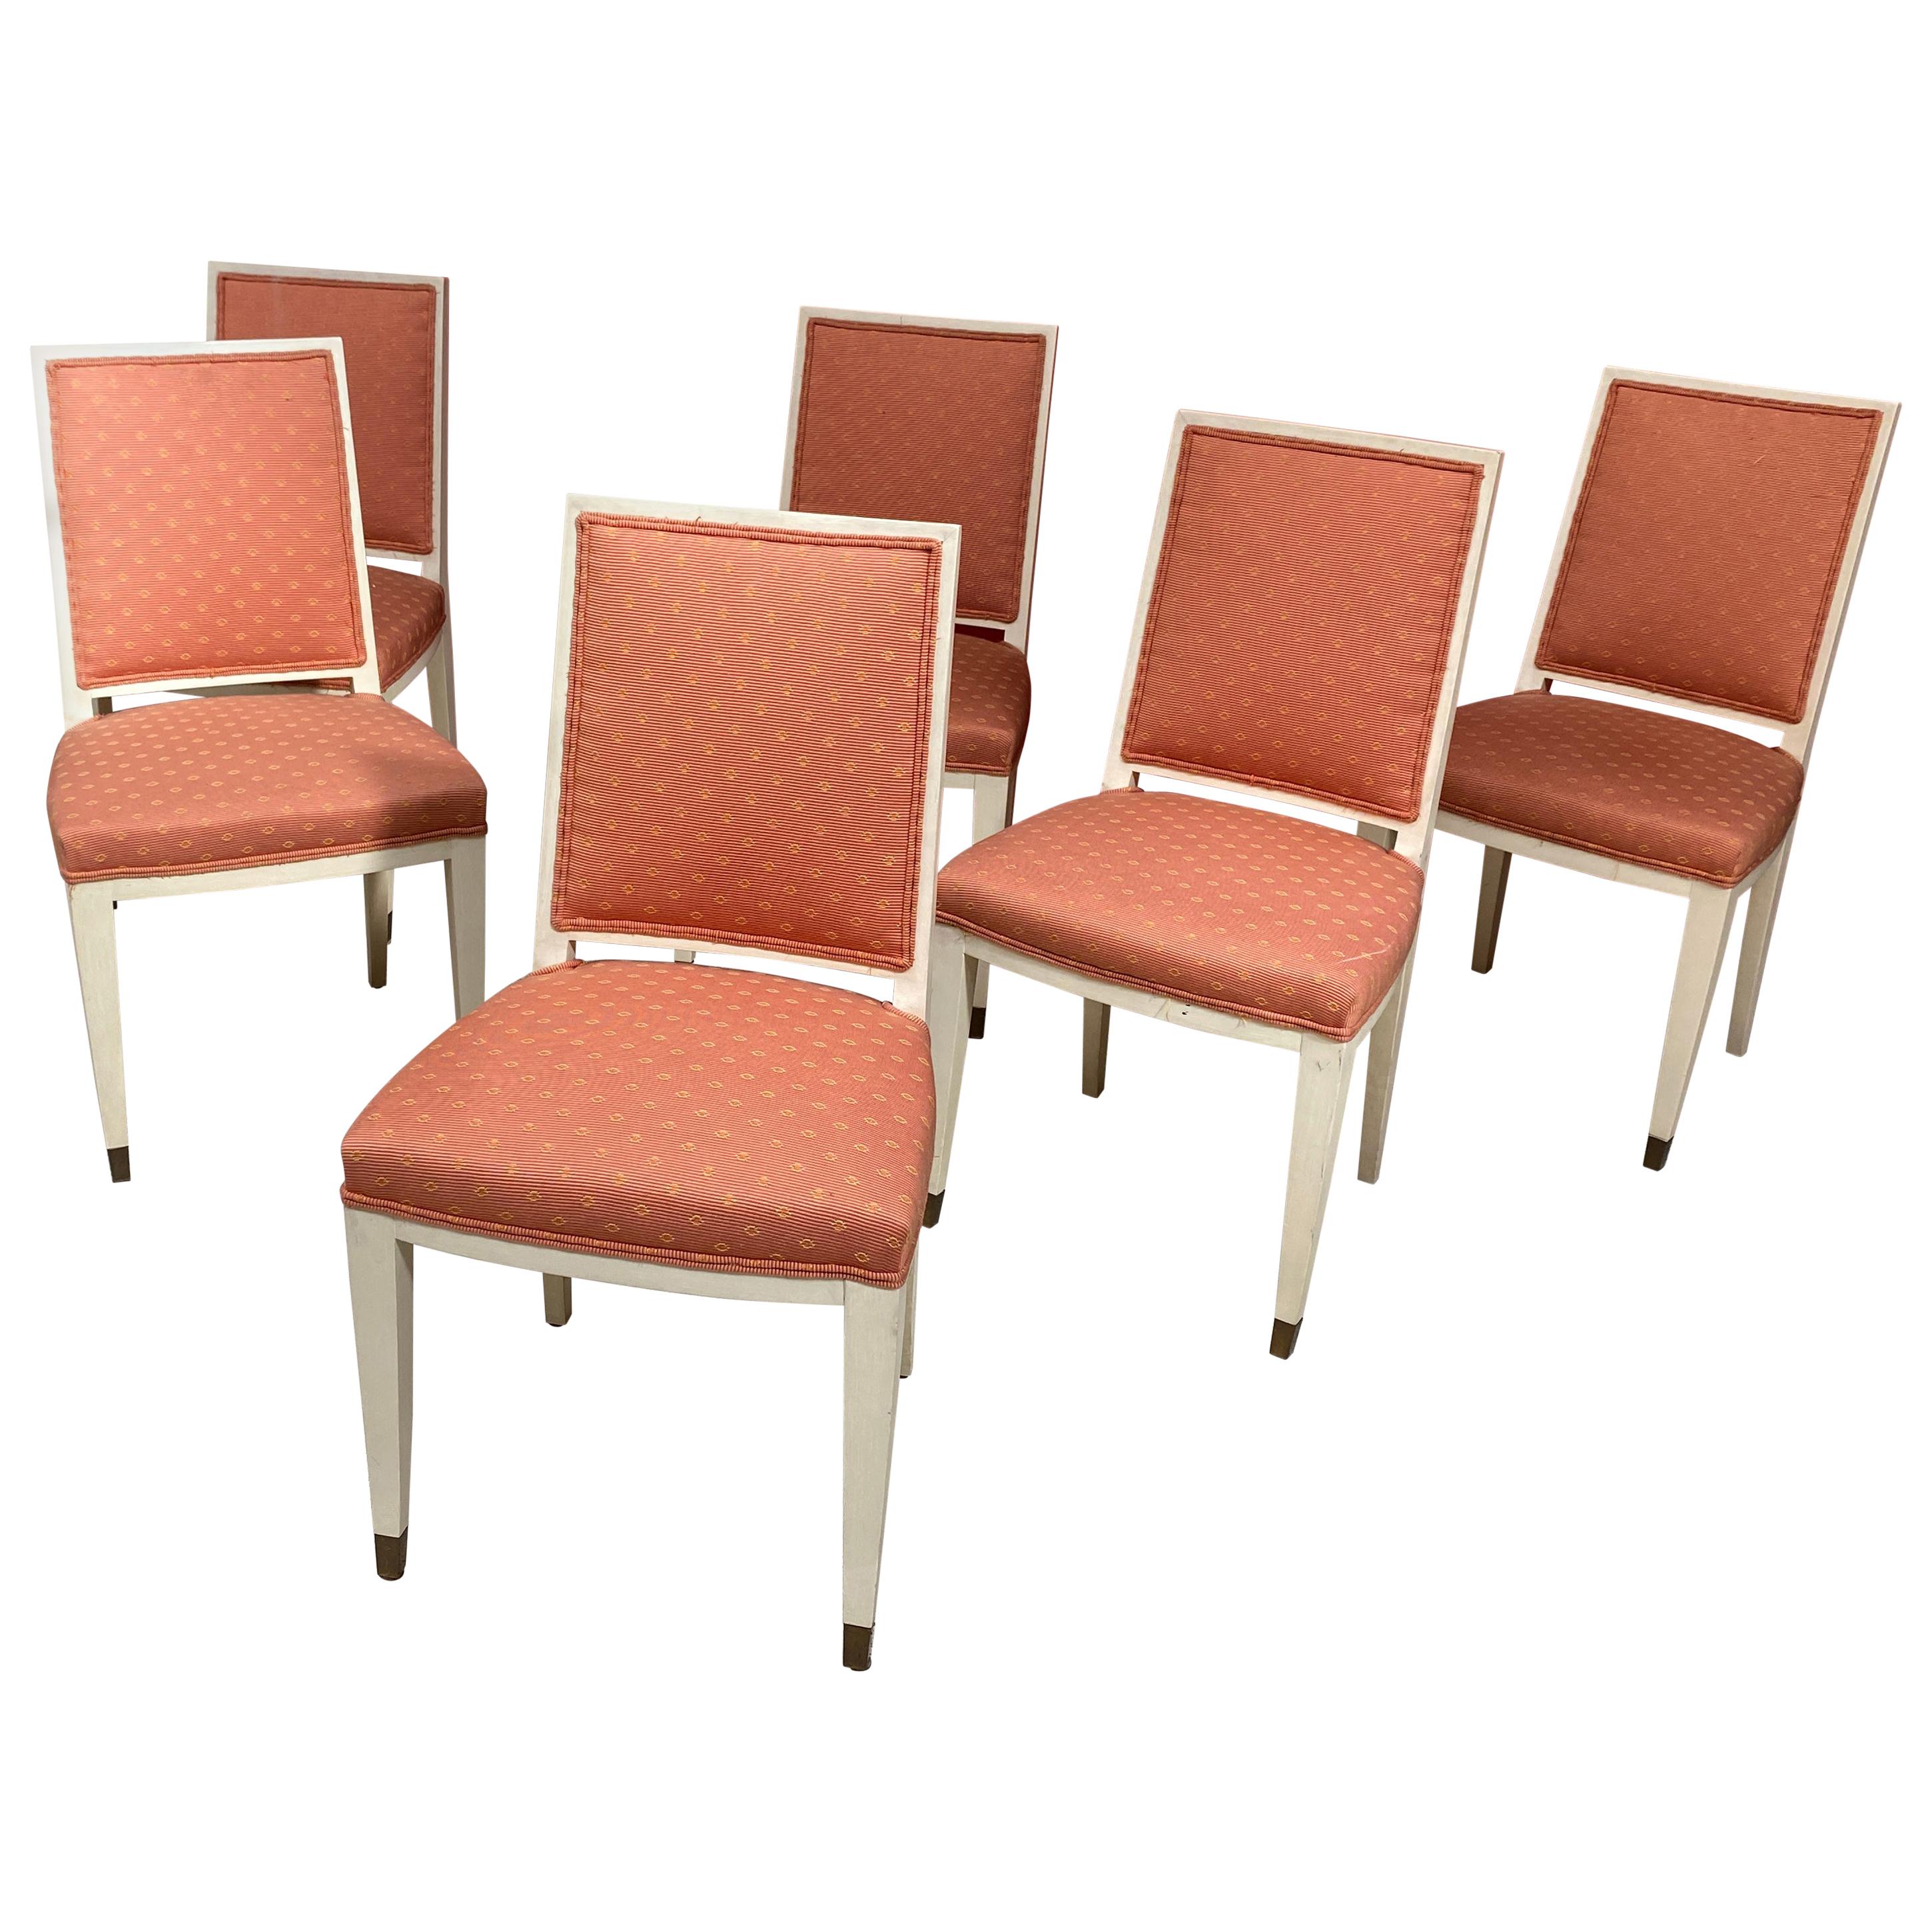 Set of 6 Elegants French Art Deco Chairs For Sale